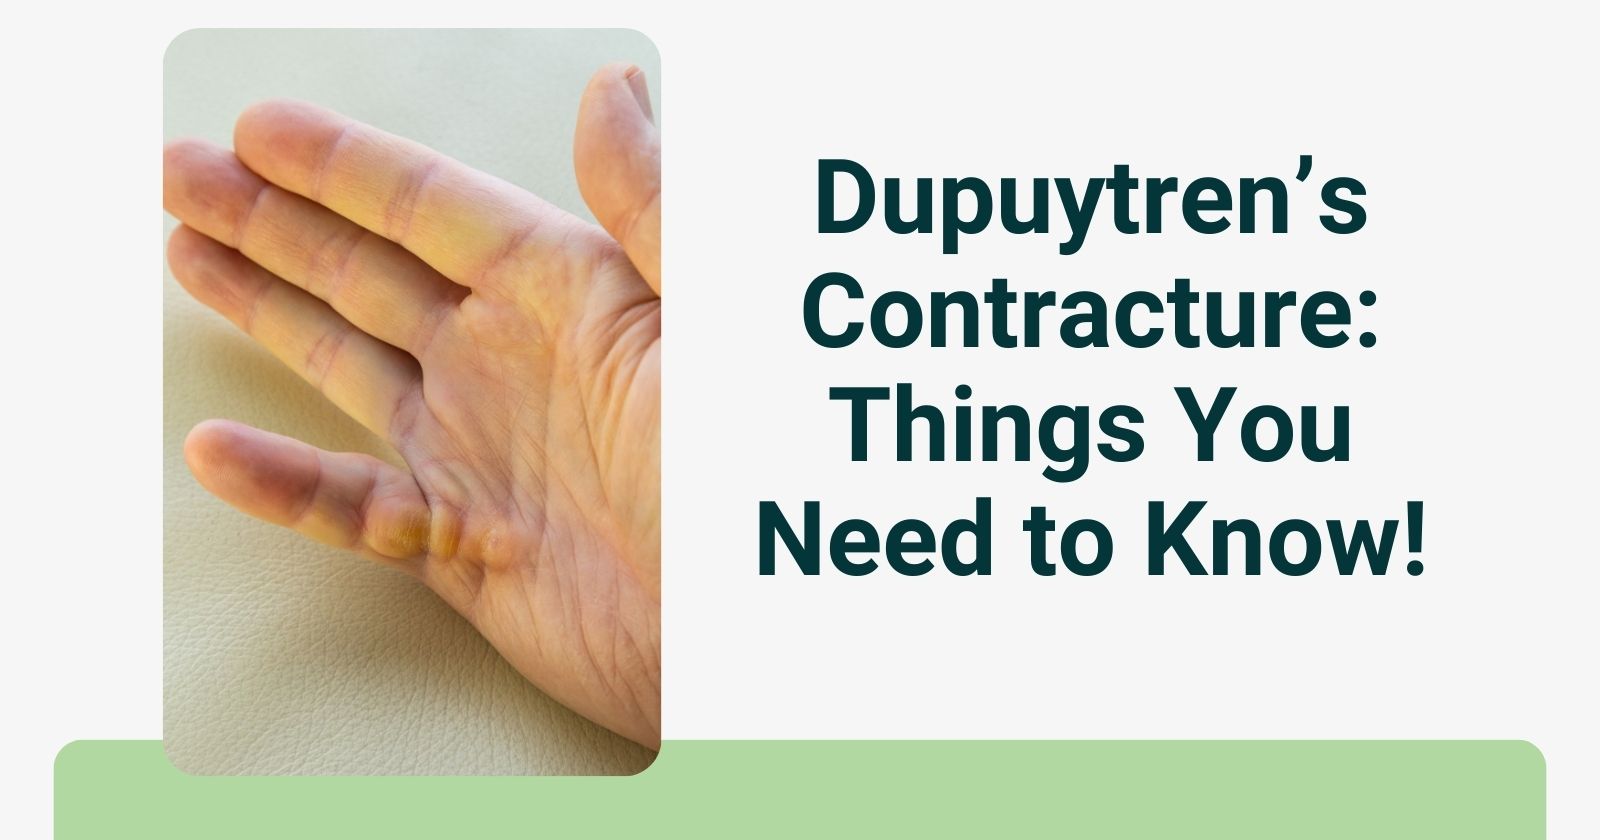 Dupuytren's Contracture: Things You Need to Know! - Dupuytrencure